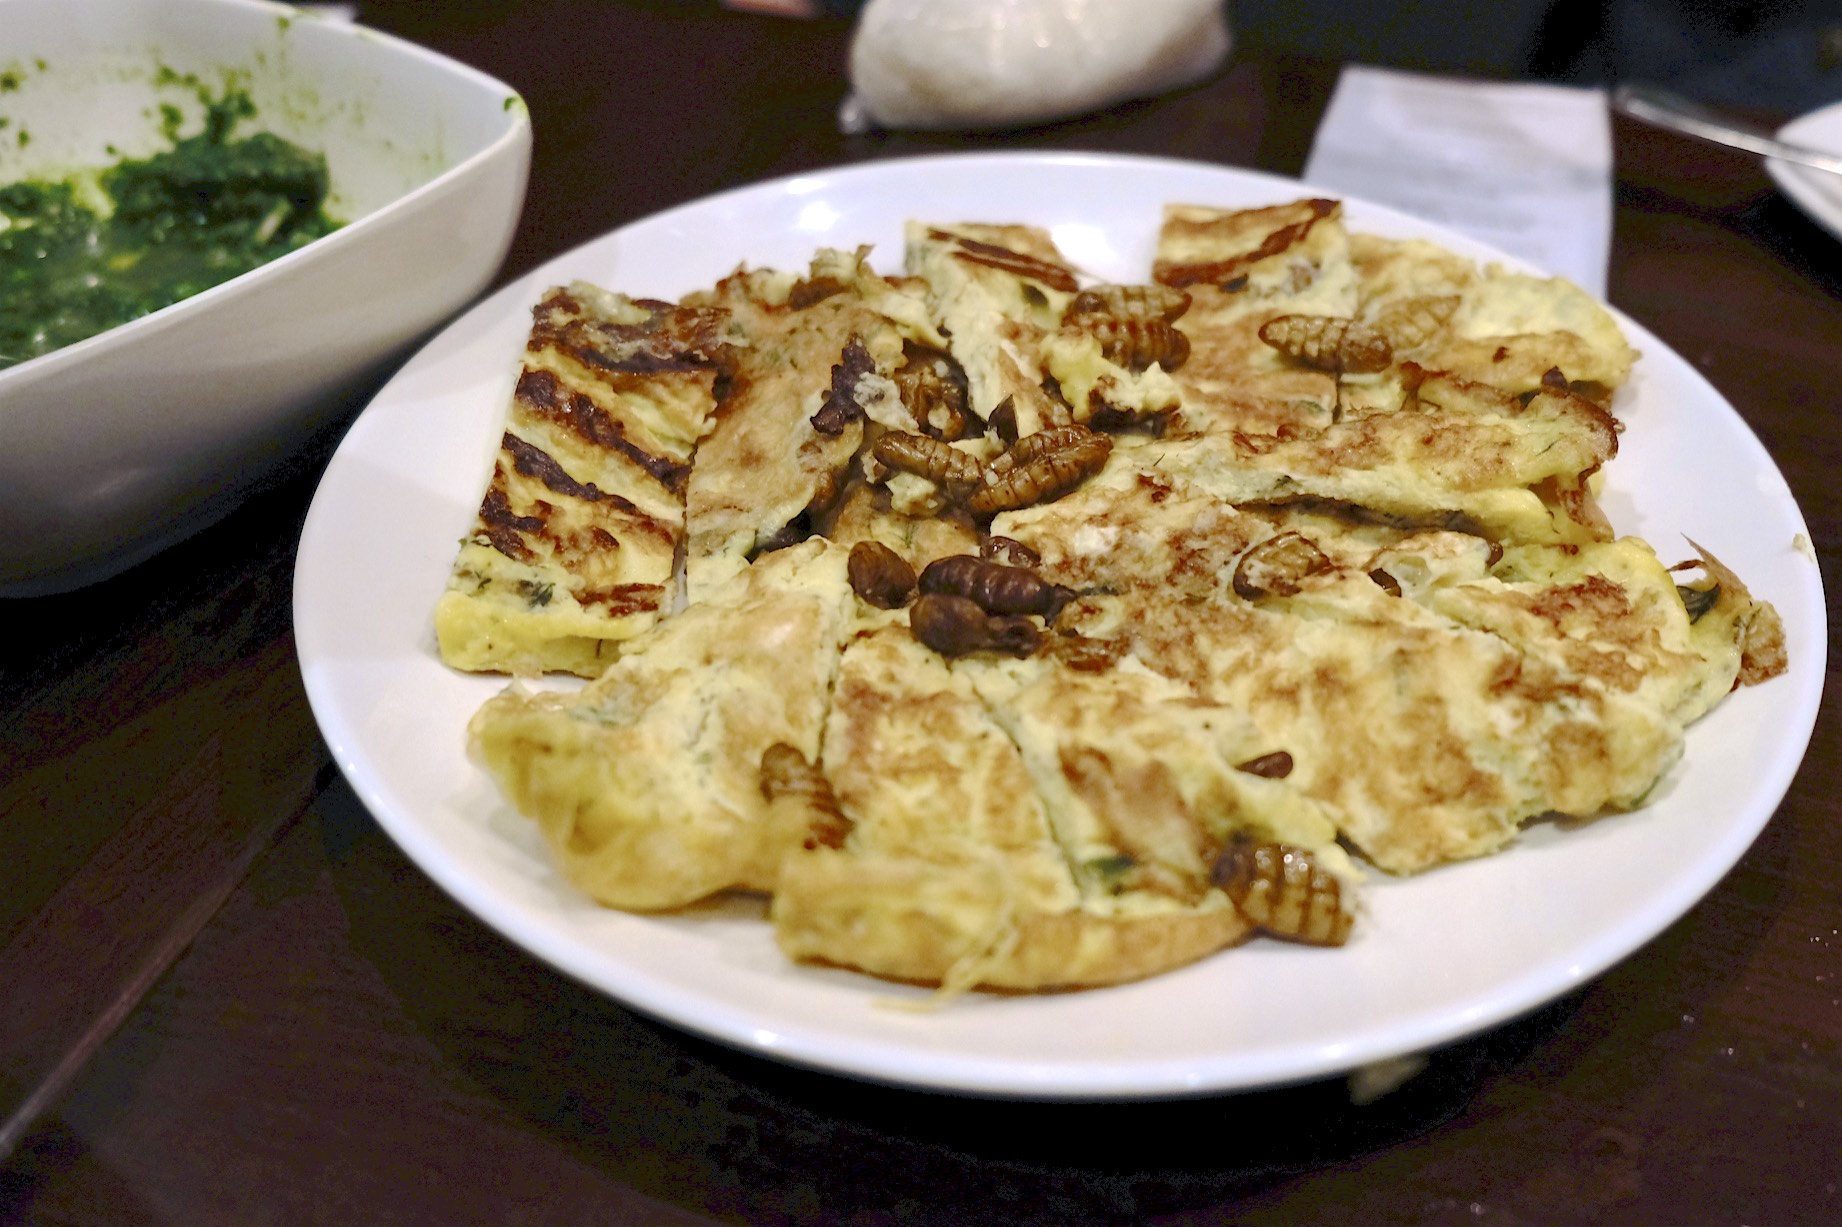 Maeng duk-dae: Lao-style silk worm omelet